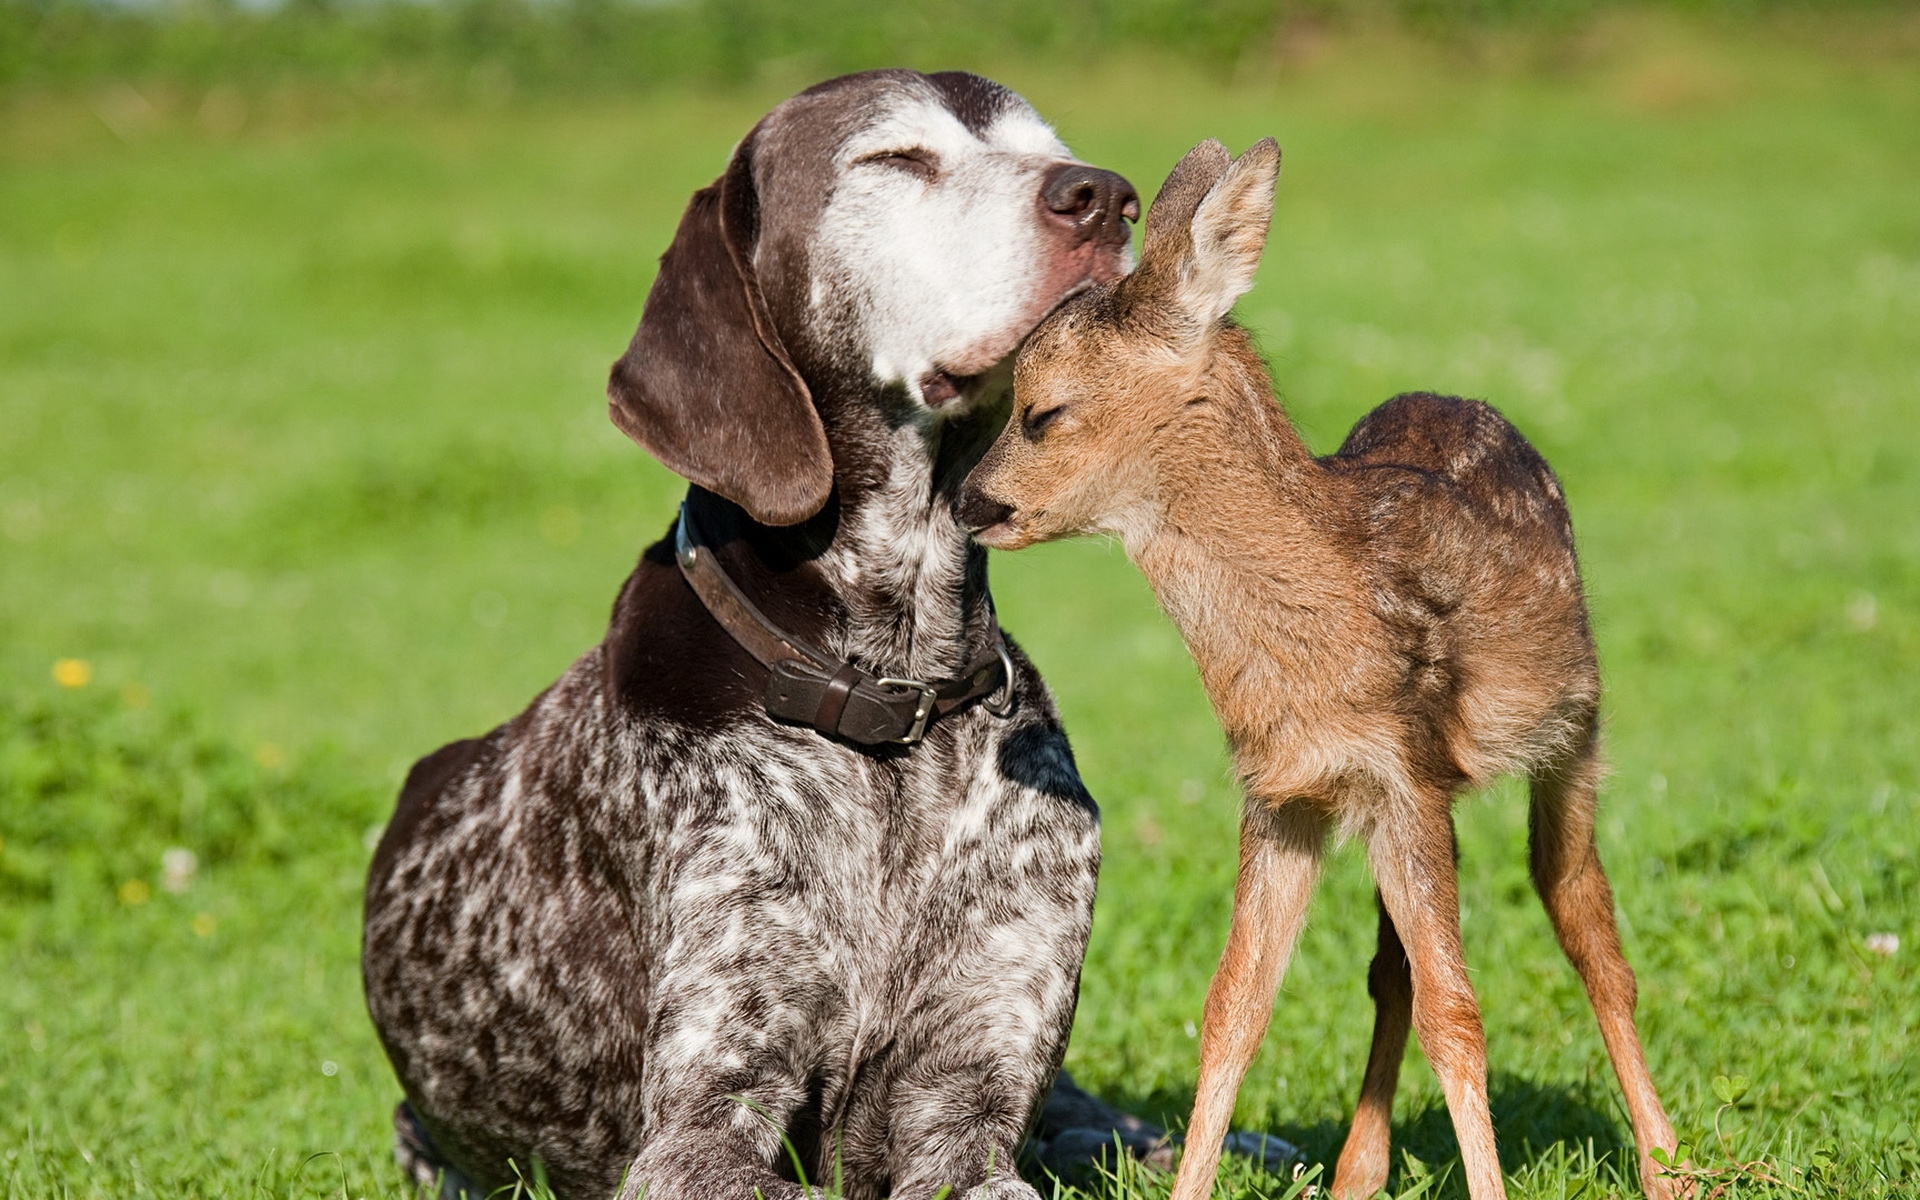 Dog And Deer Wallpaper Image Pictures Photos